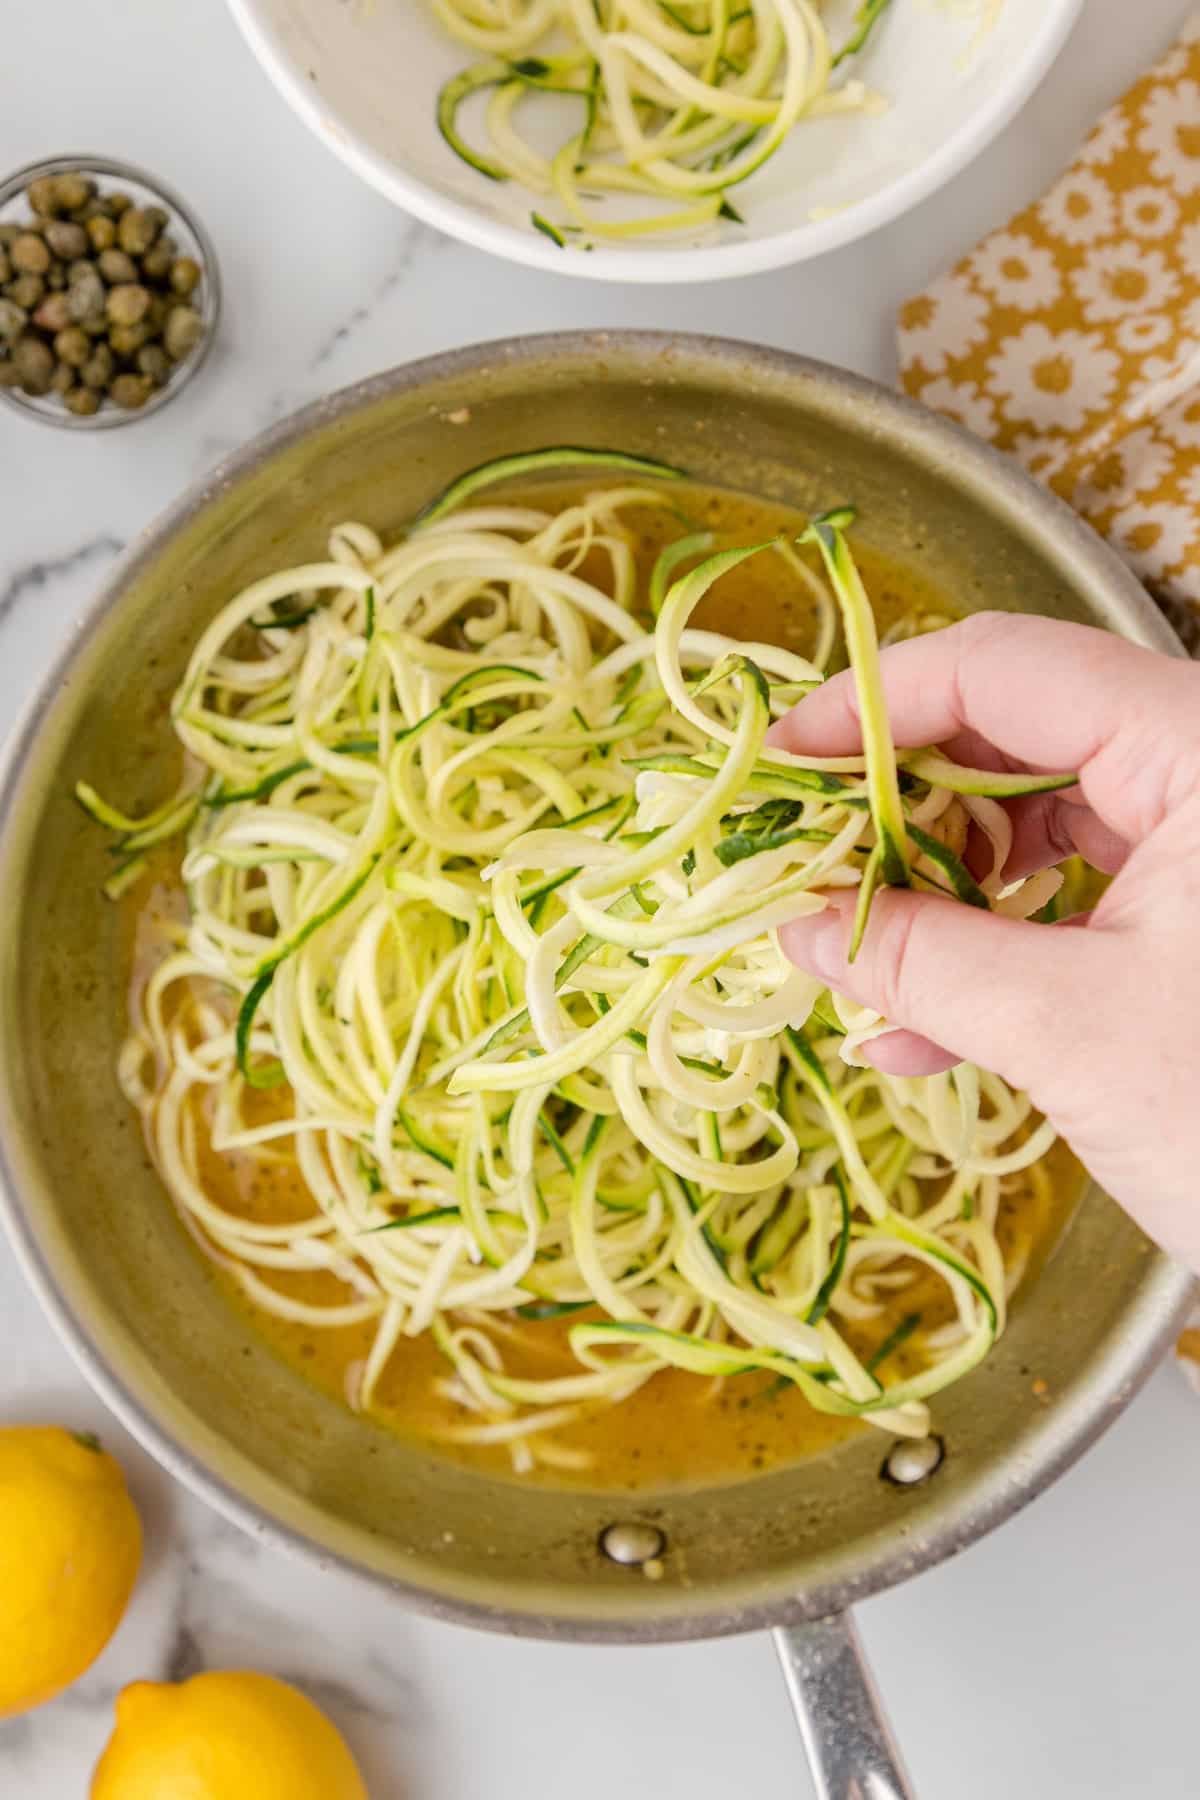 add the zucchini noodles to the piccata sauce in the skillet